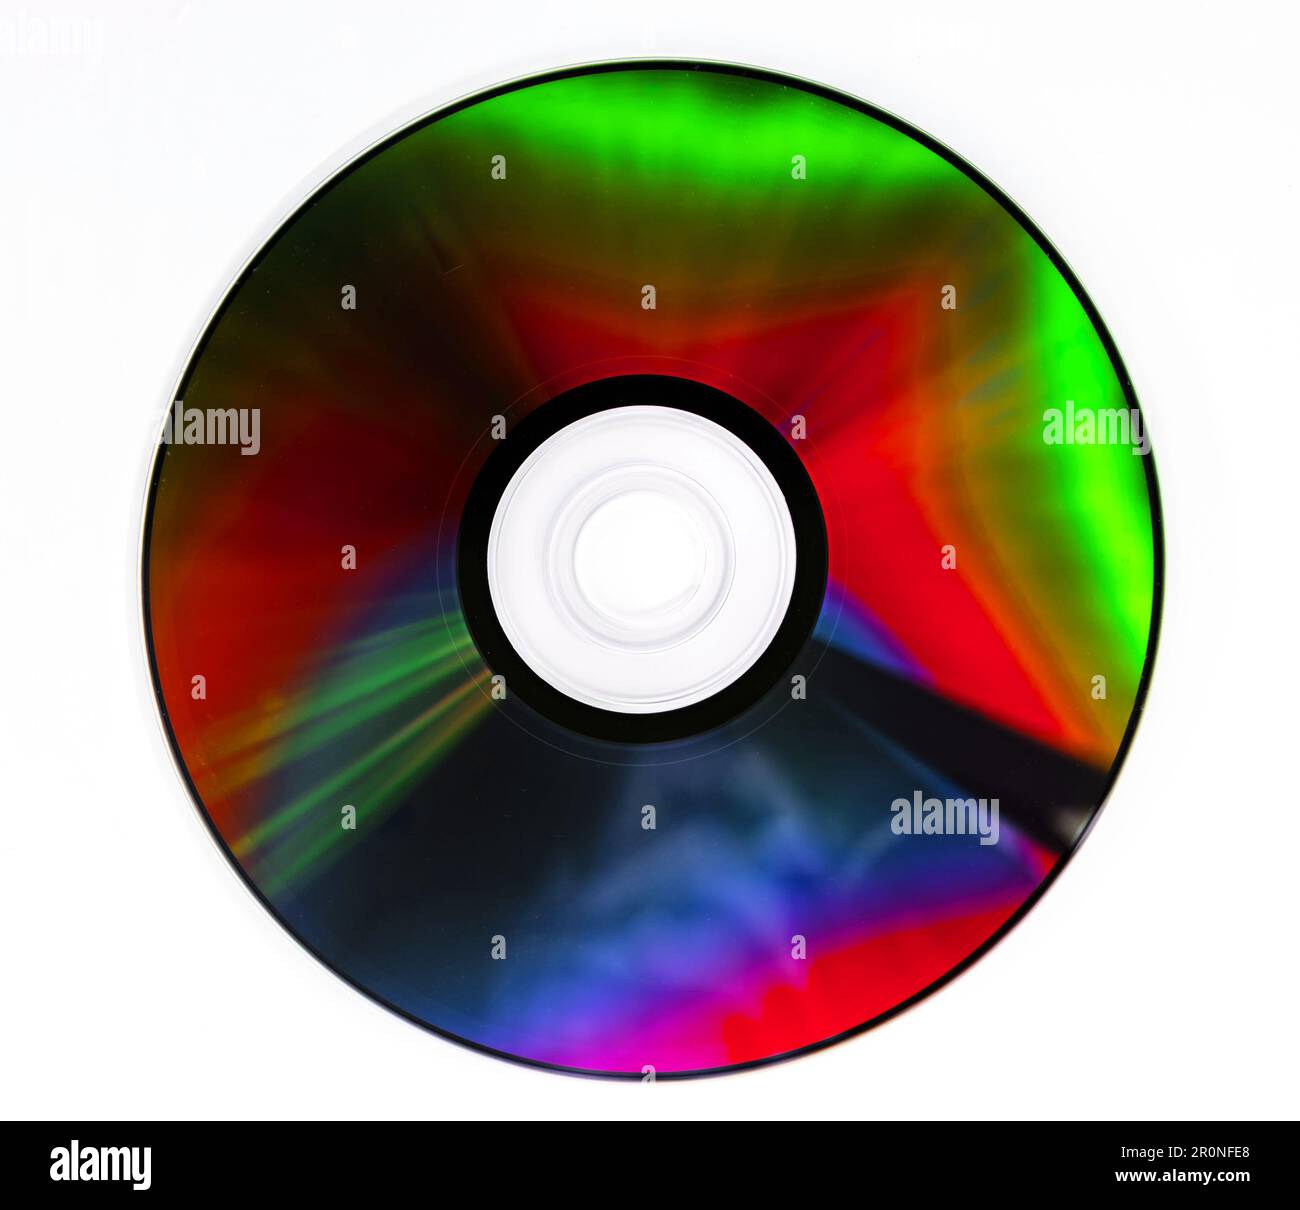 CD DVD compact optical disk storage medium with dust and scratches. Rainbow spectrum of iridescent colors Stock Photo